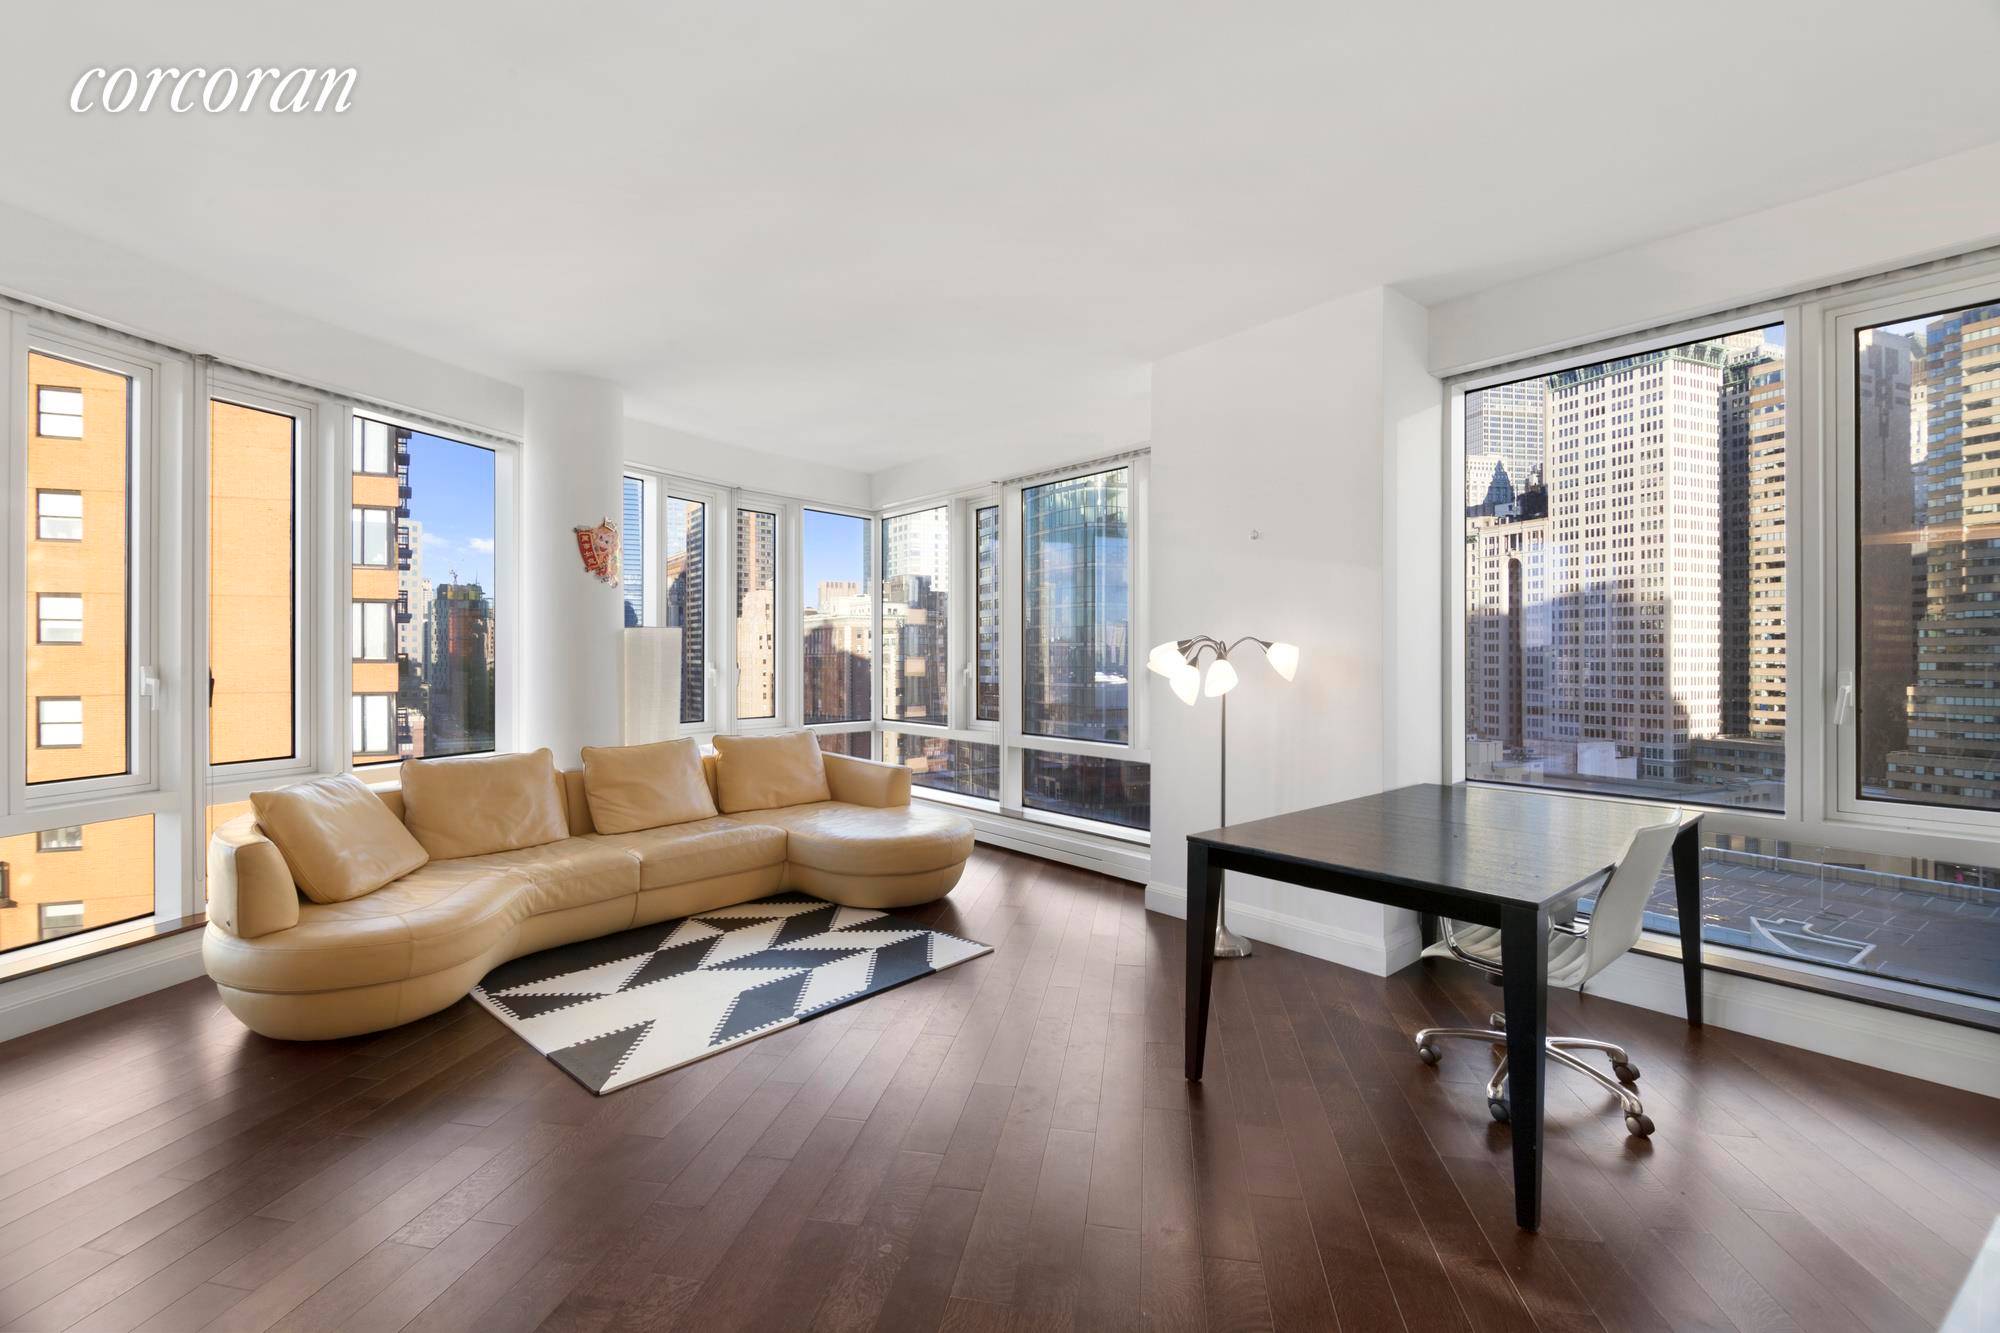 FURNISHED. This spacious 2 bedrooms and 2 baths home at the Pelli designed condominium The Visionaire features spectacular city and water views.